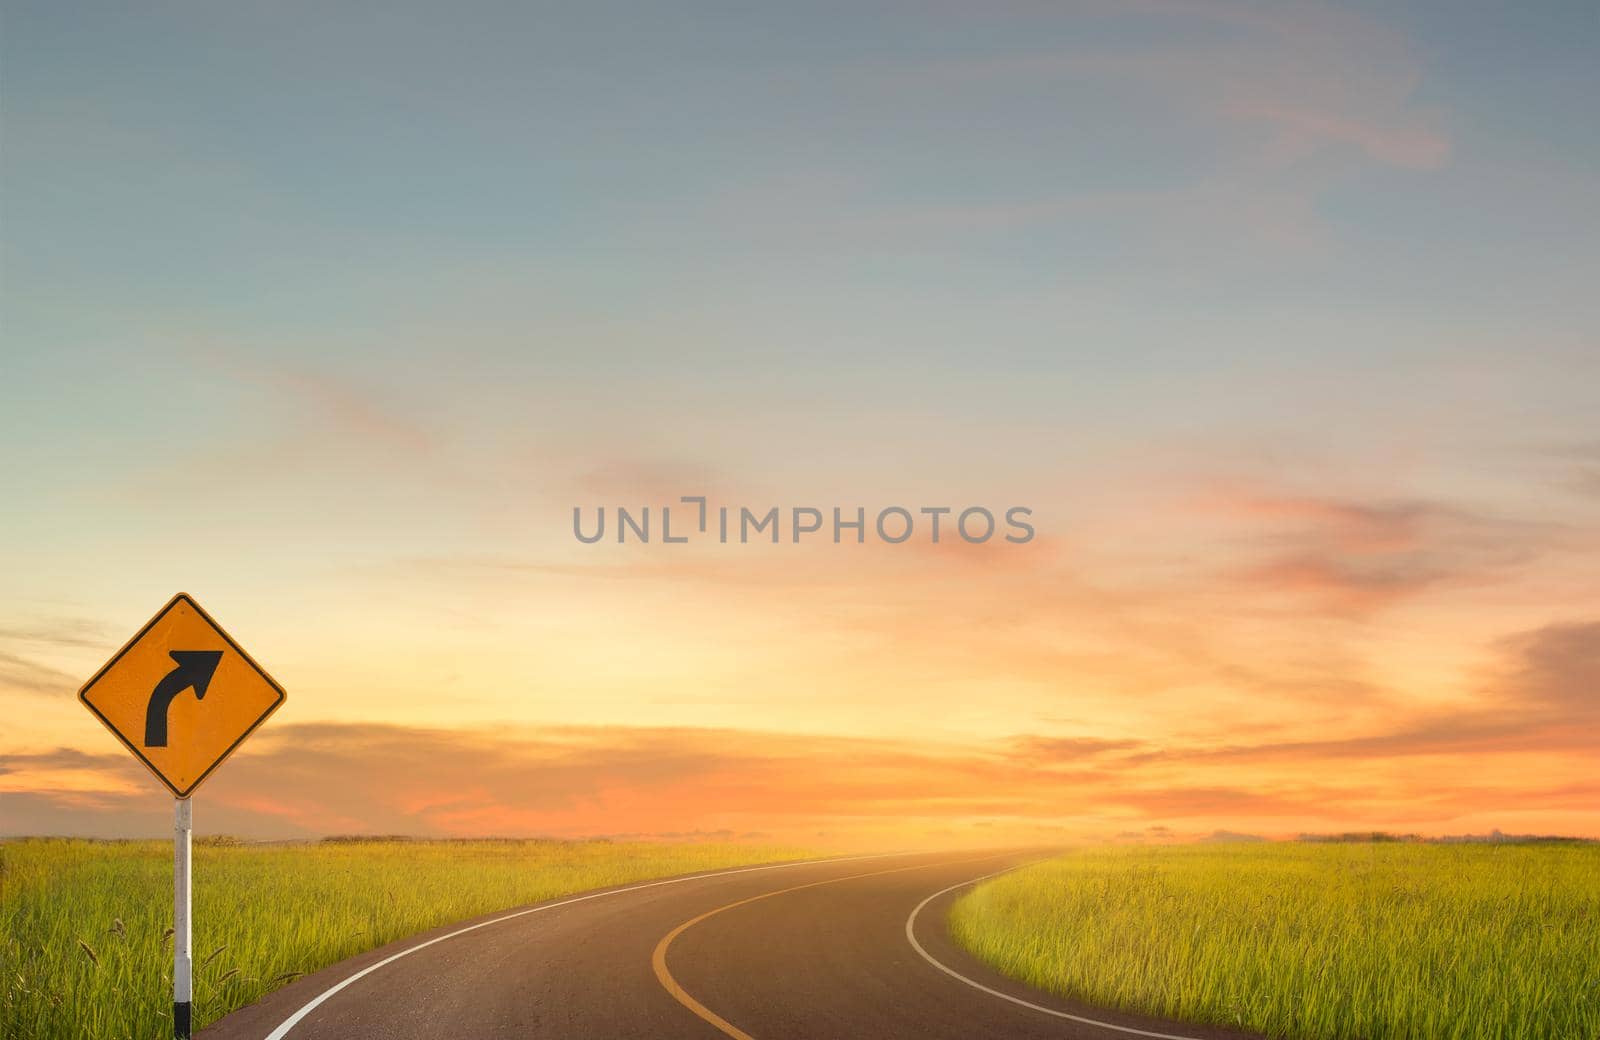 Sign curved road on the way at the natural sunset over field or meadow. Countryside Landscape Under Scenic Colorful Sky At Sunset. Nature Concept.